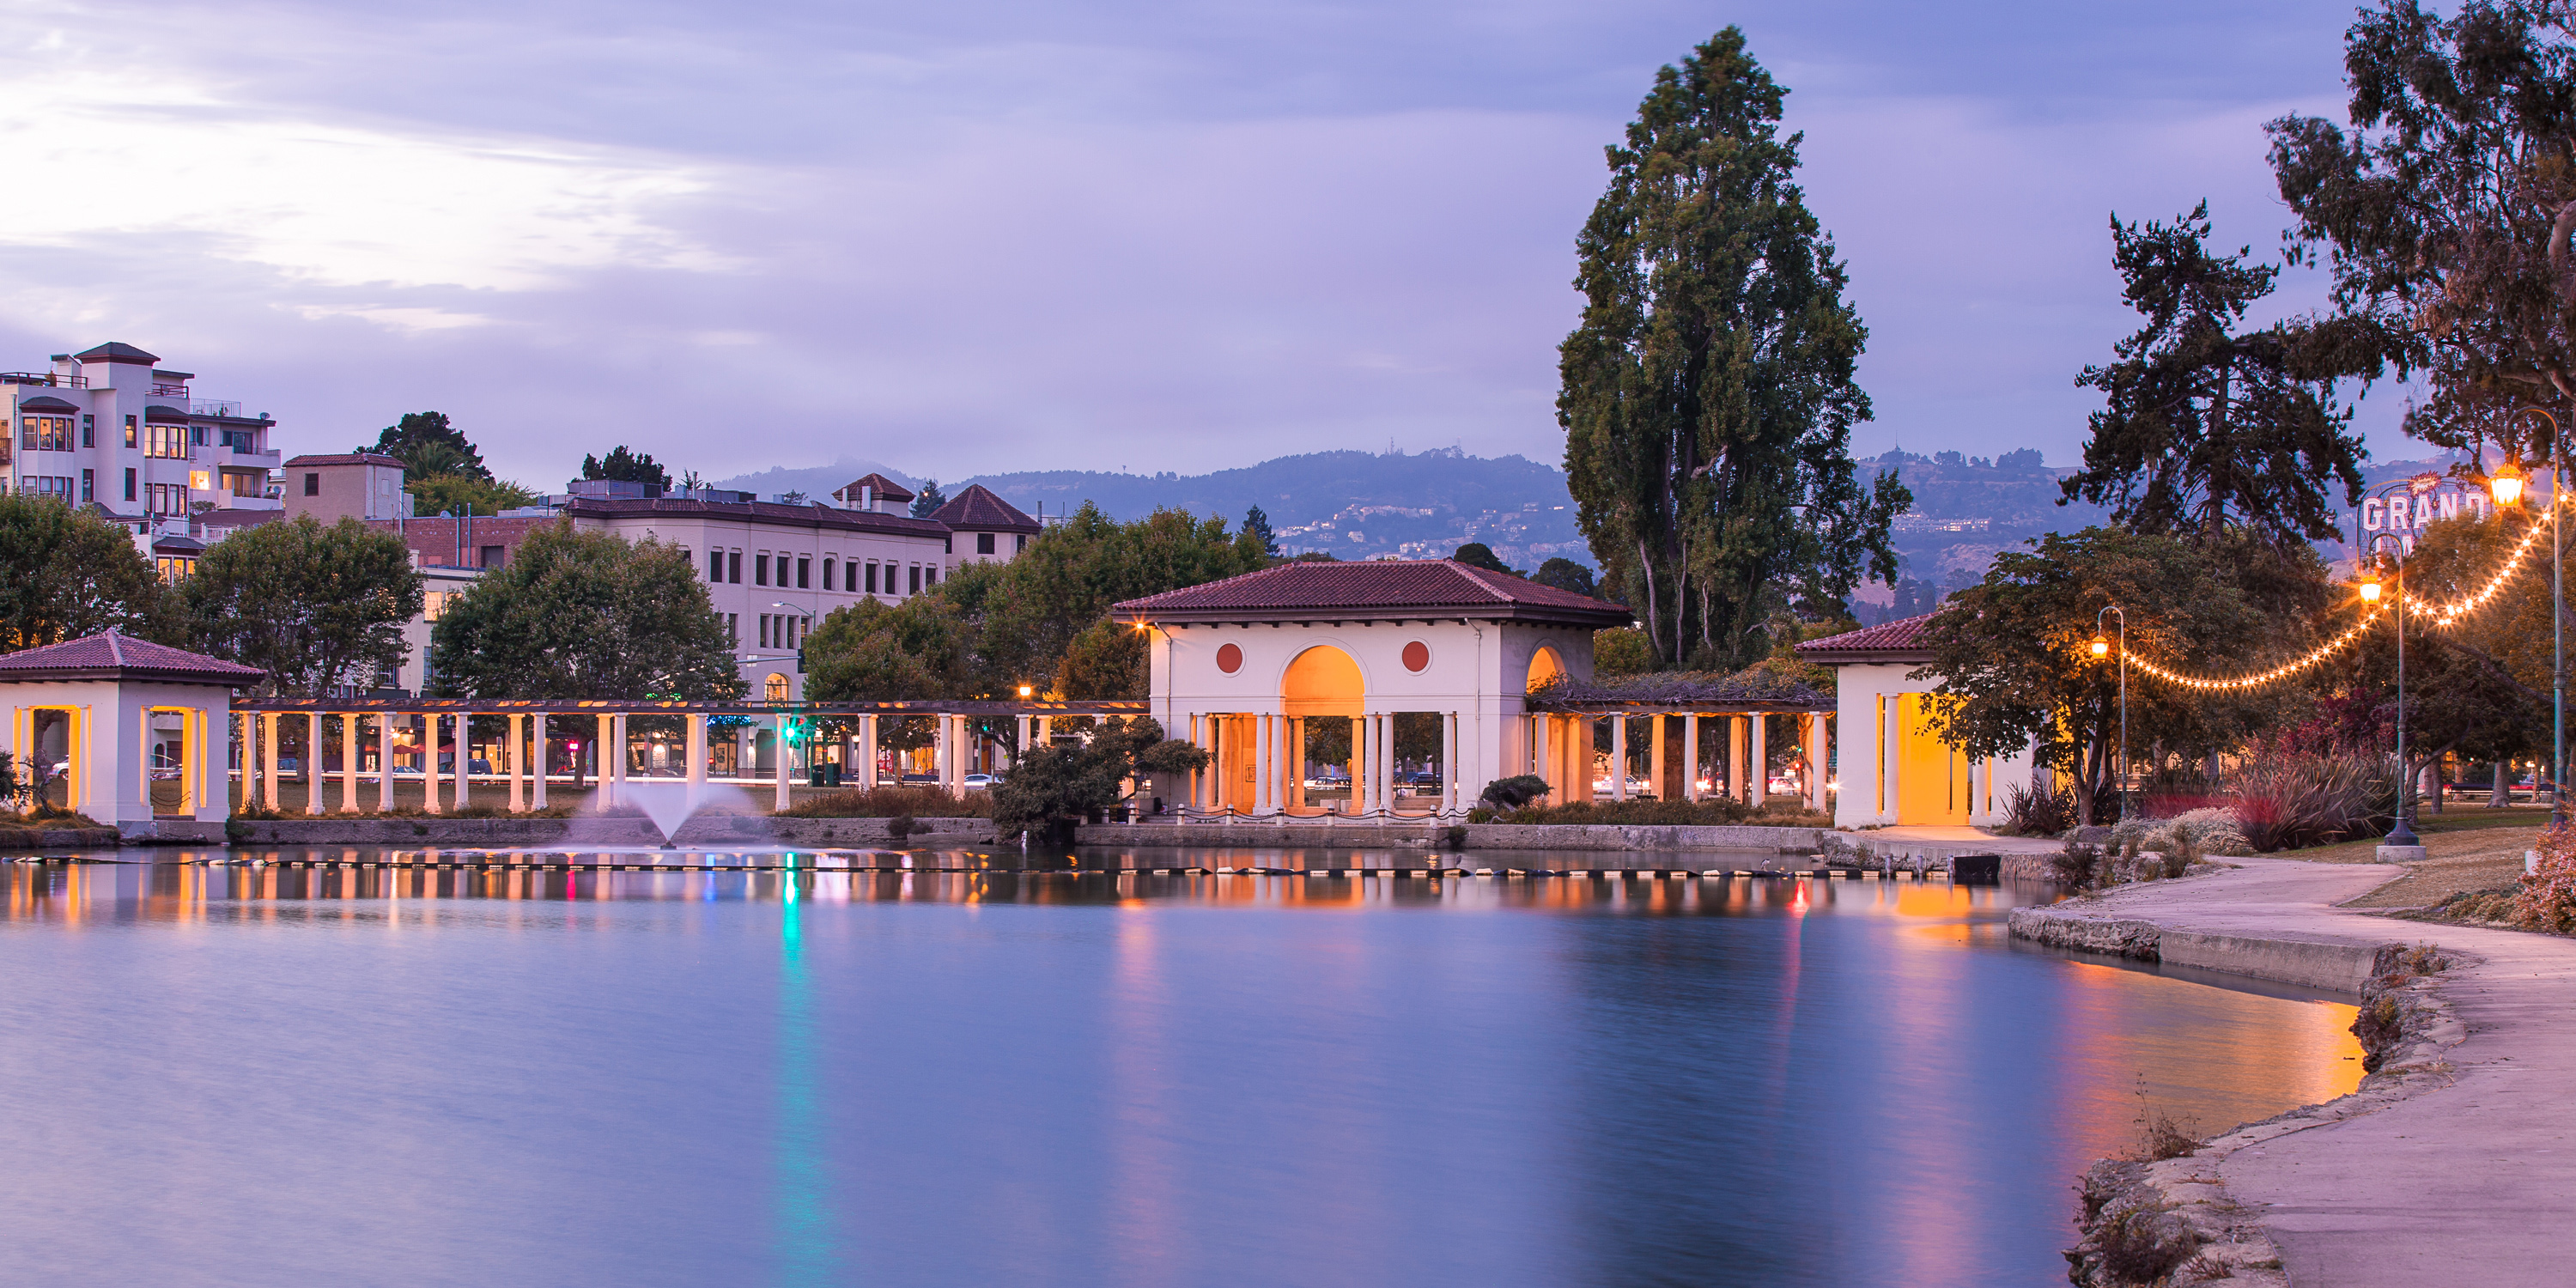 Lake Merritt is surrounded by an accesible walking path and pergola for visitors.